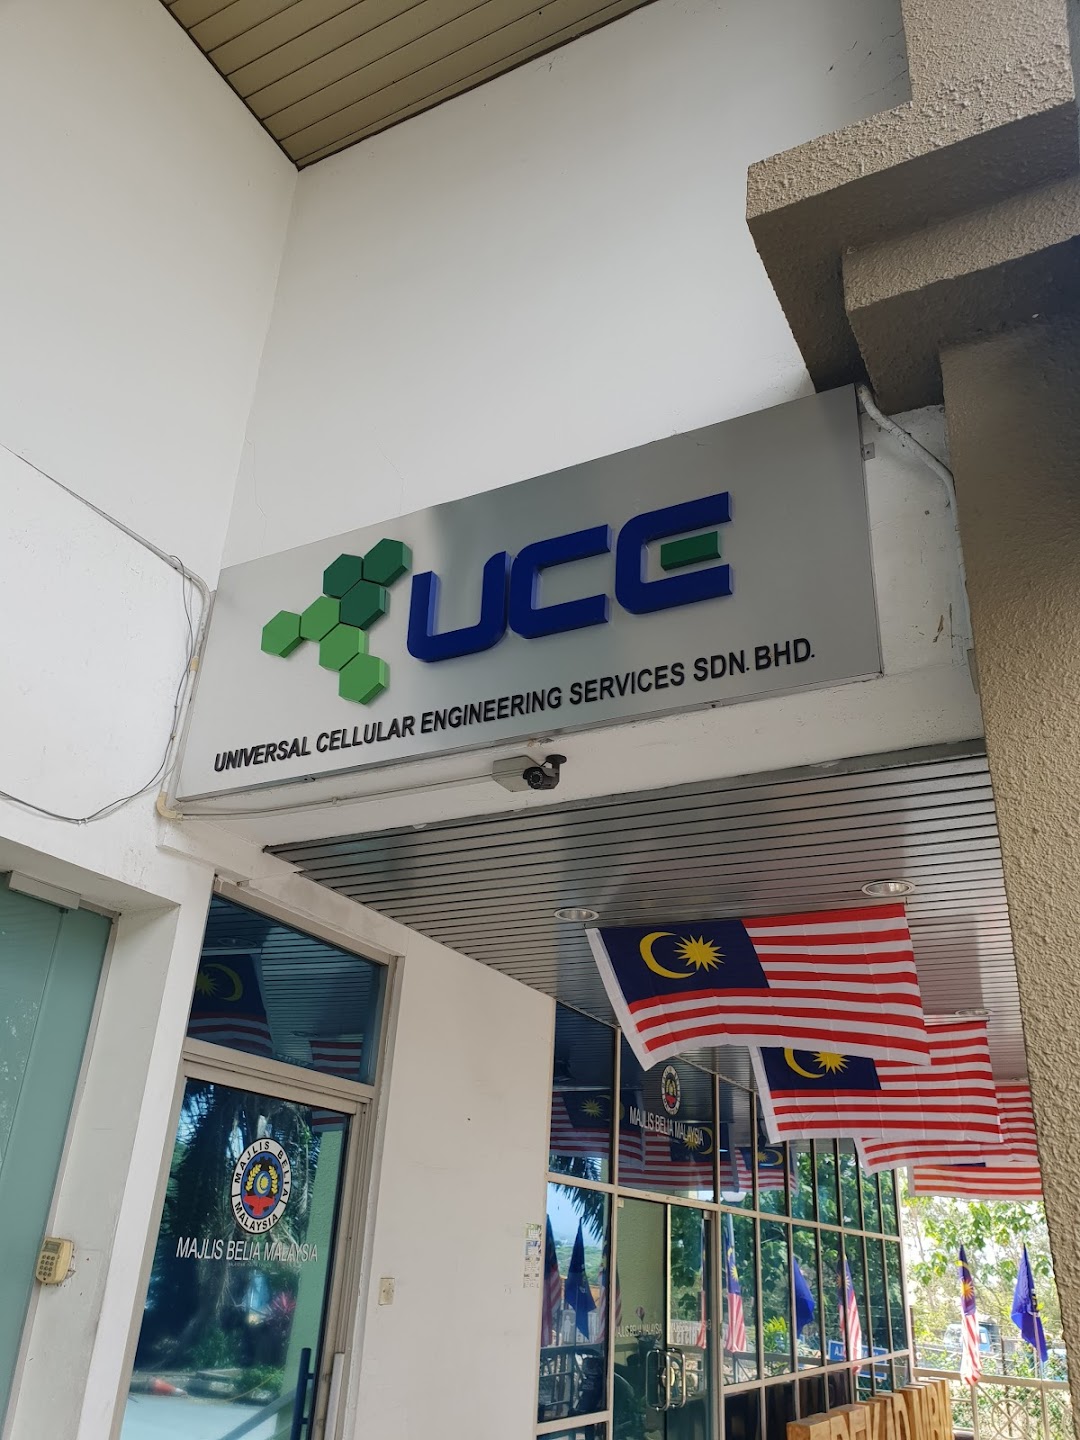 Universal Cellular Engineering Services Sdn Bhd